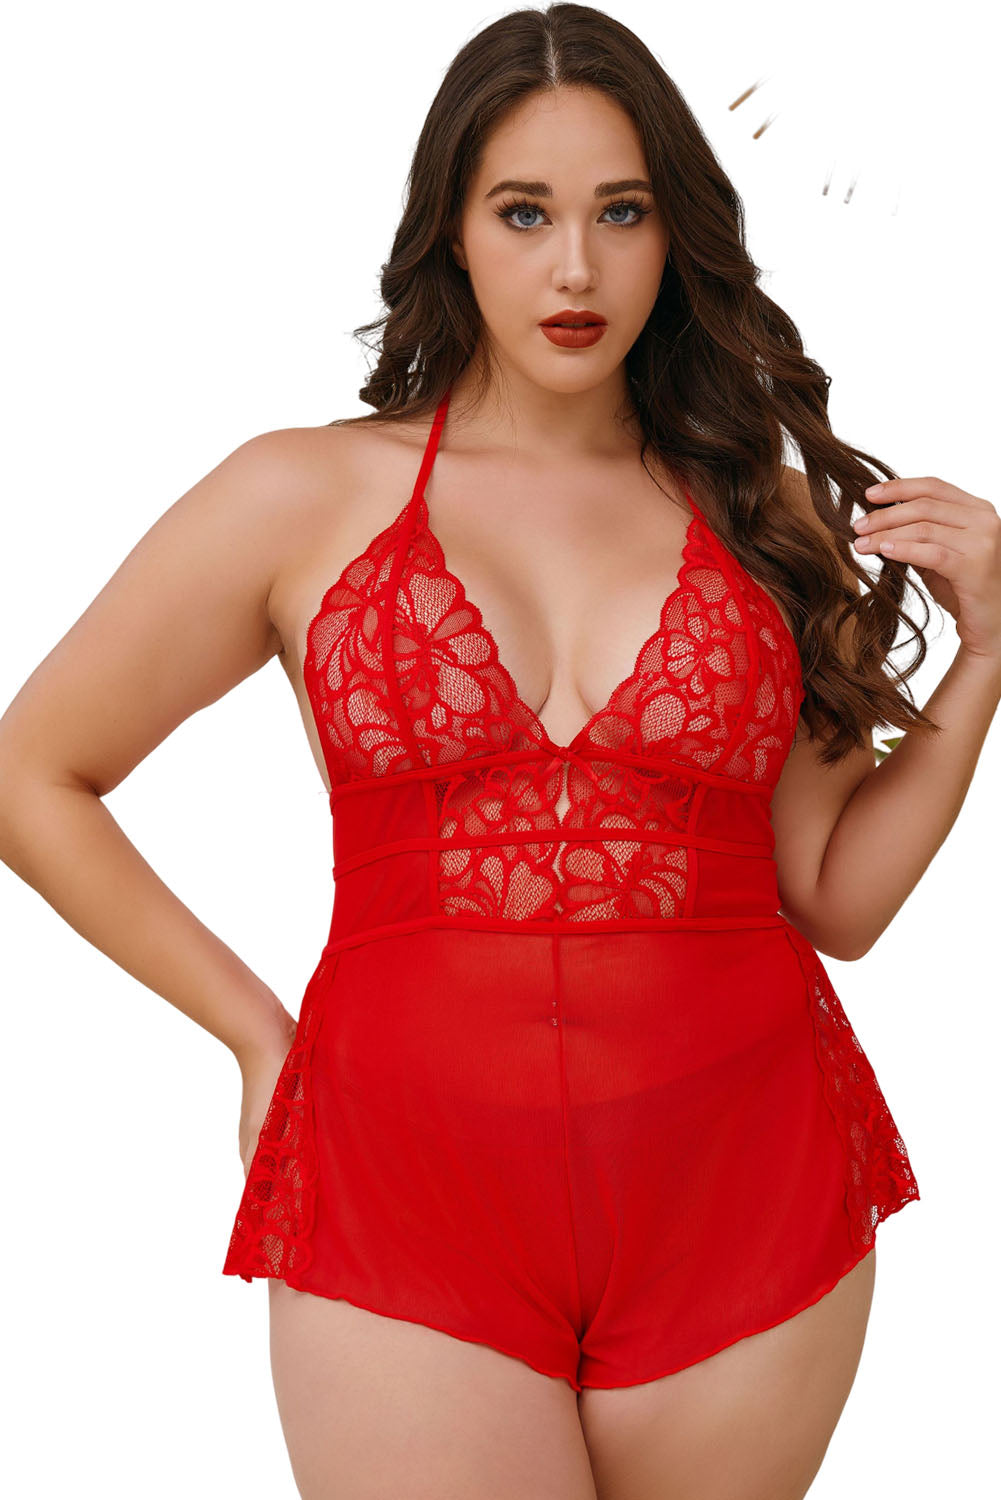 Red Plus Size Lace Backless Halter Neck Teddy Lingerie